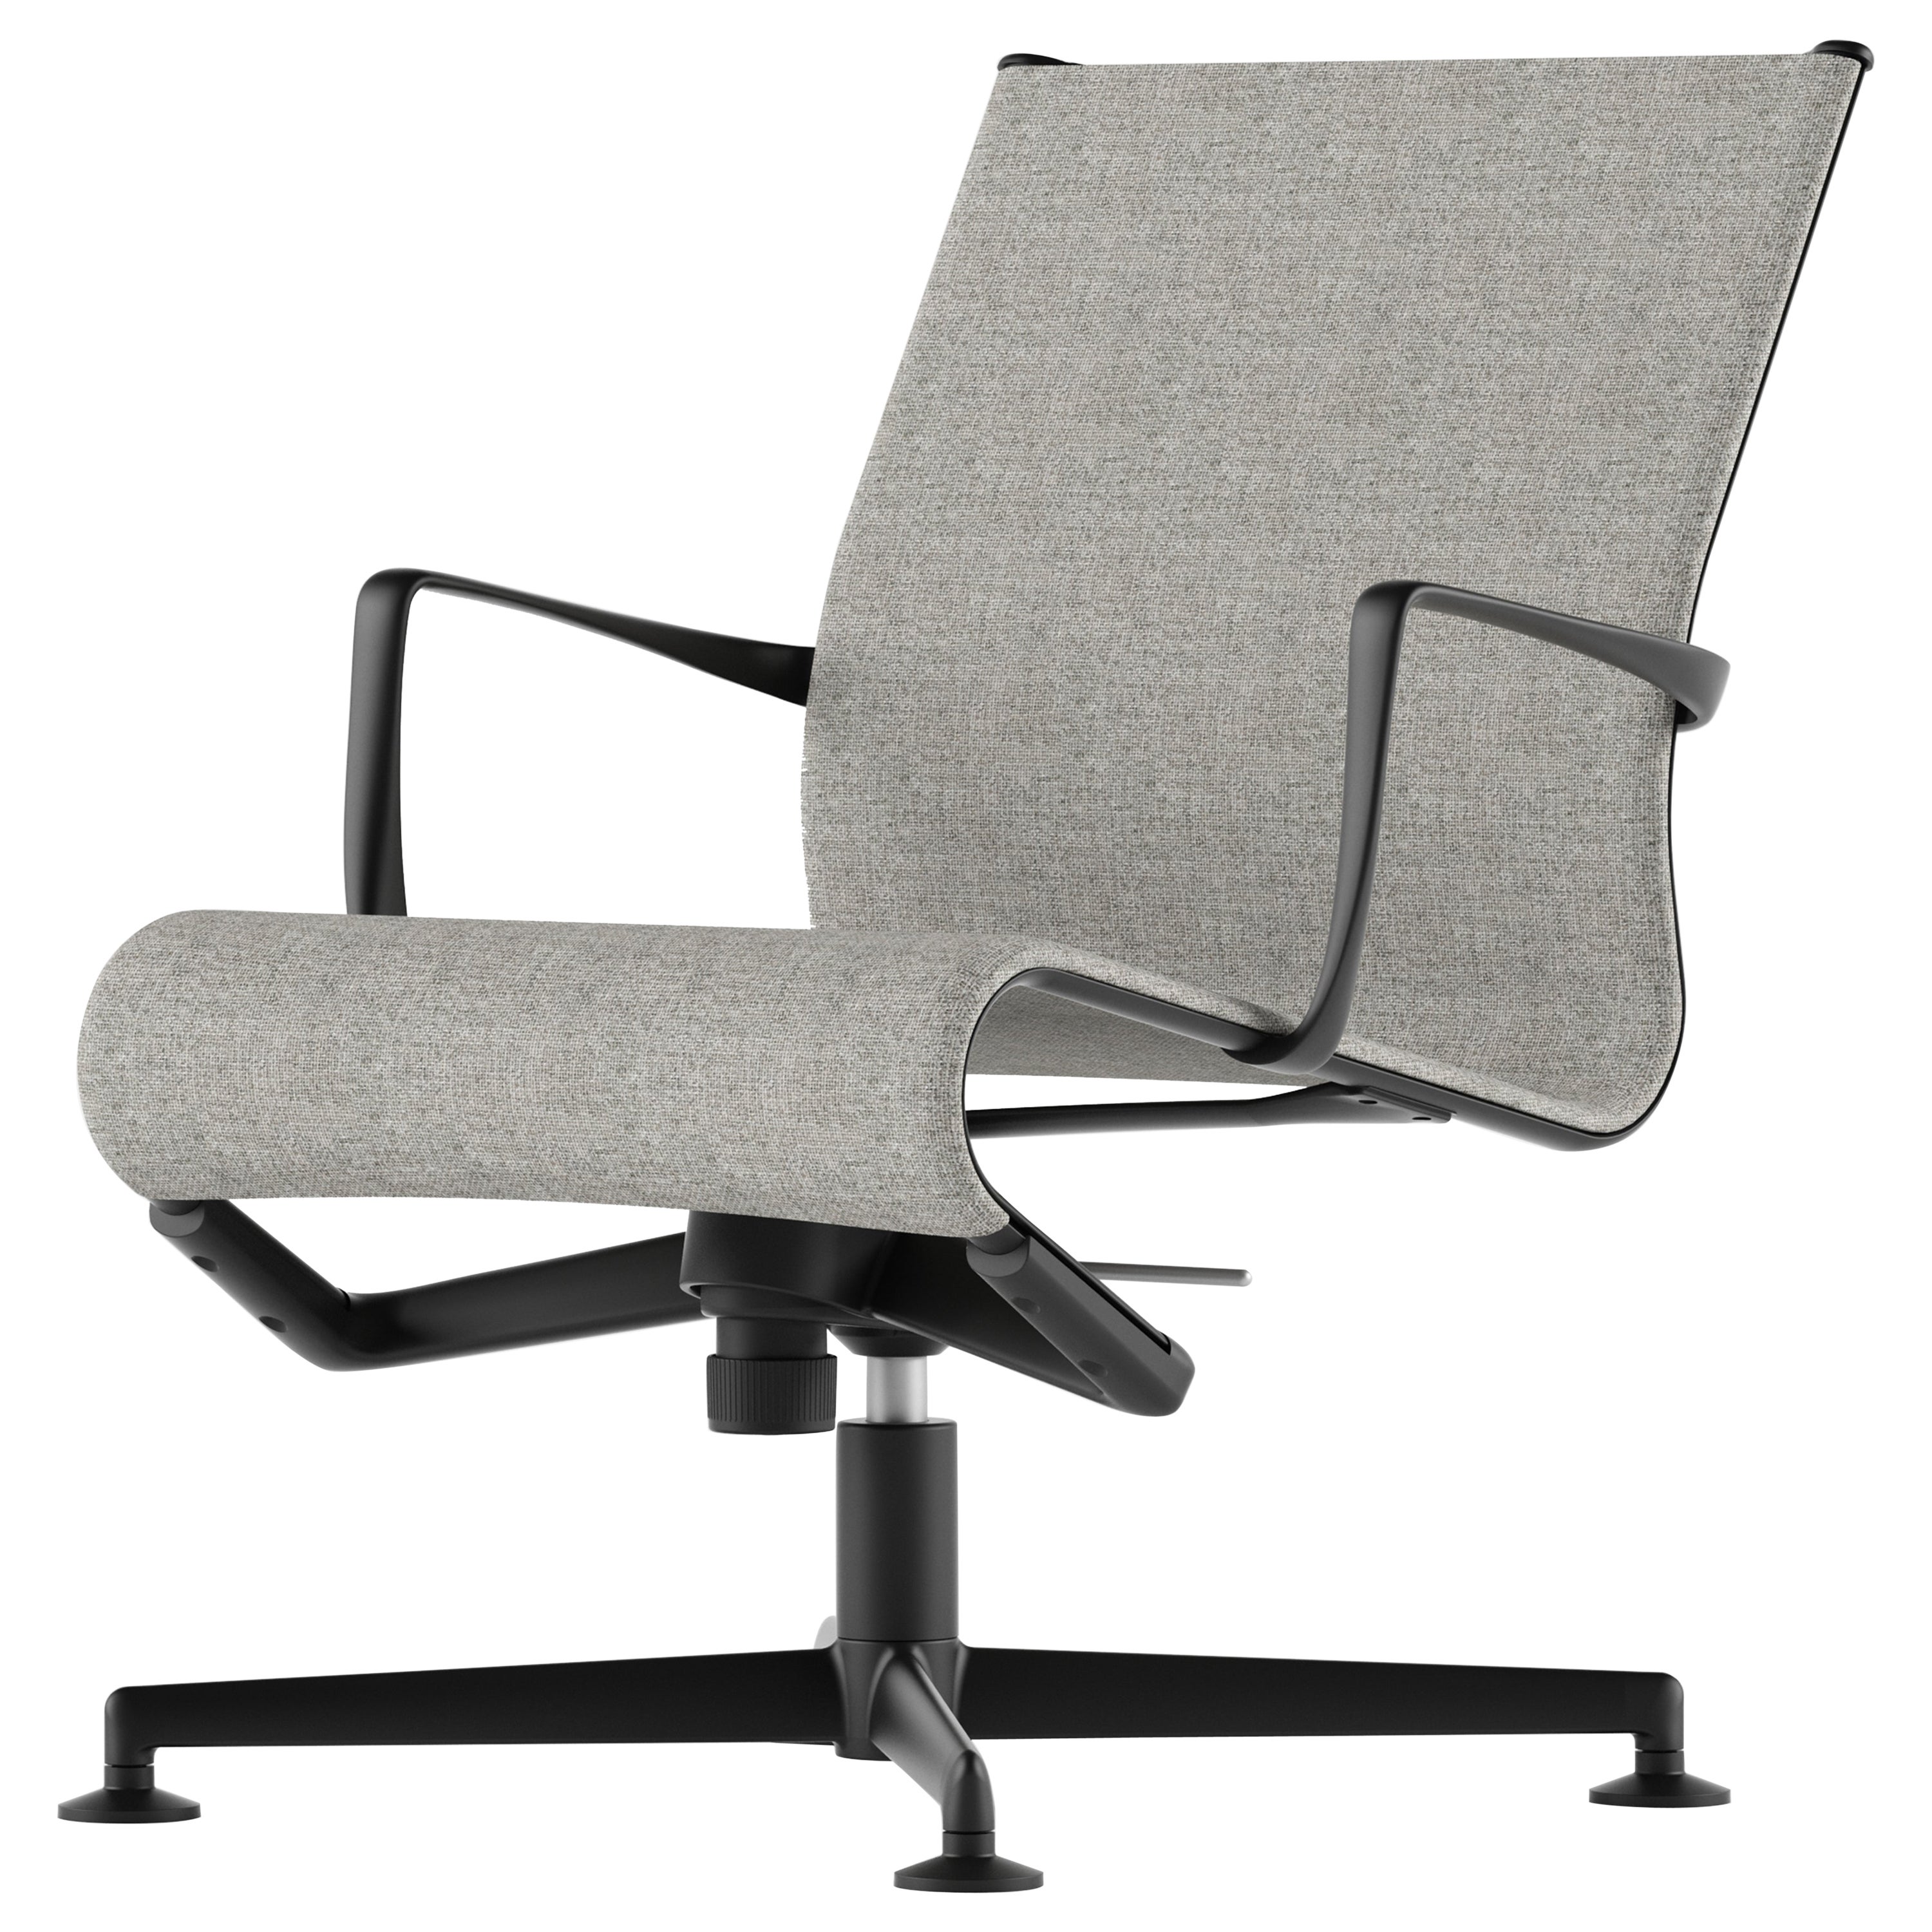 Alias 435 Meetingframe Armchair in Grey Seat with Lacquered Aluminium Frame For Sale